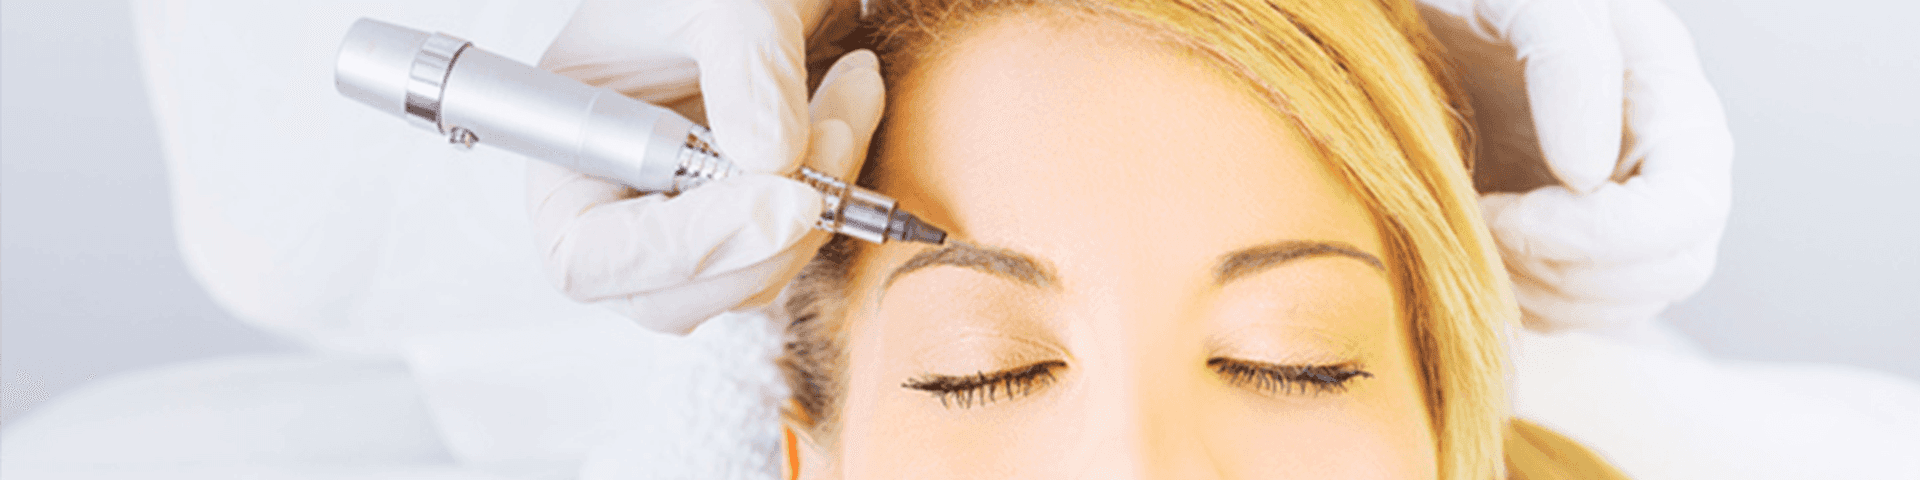 Woman receiving eyebrow treatment from day spa